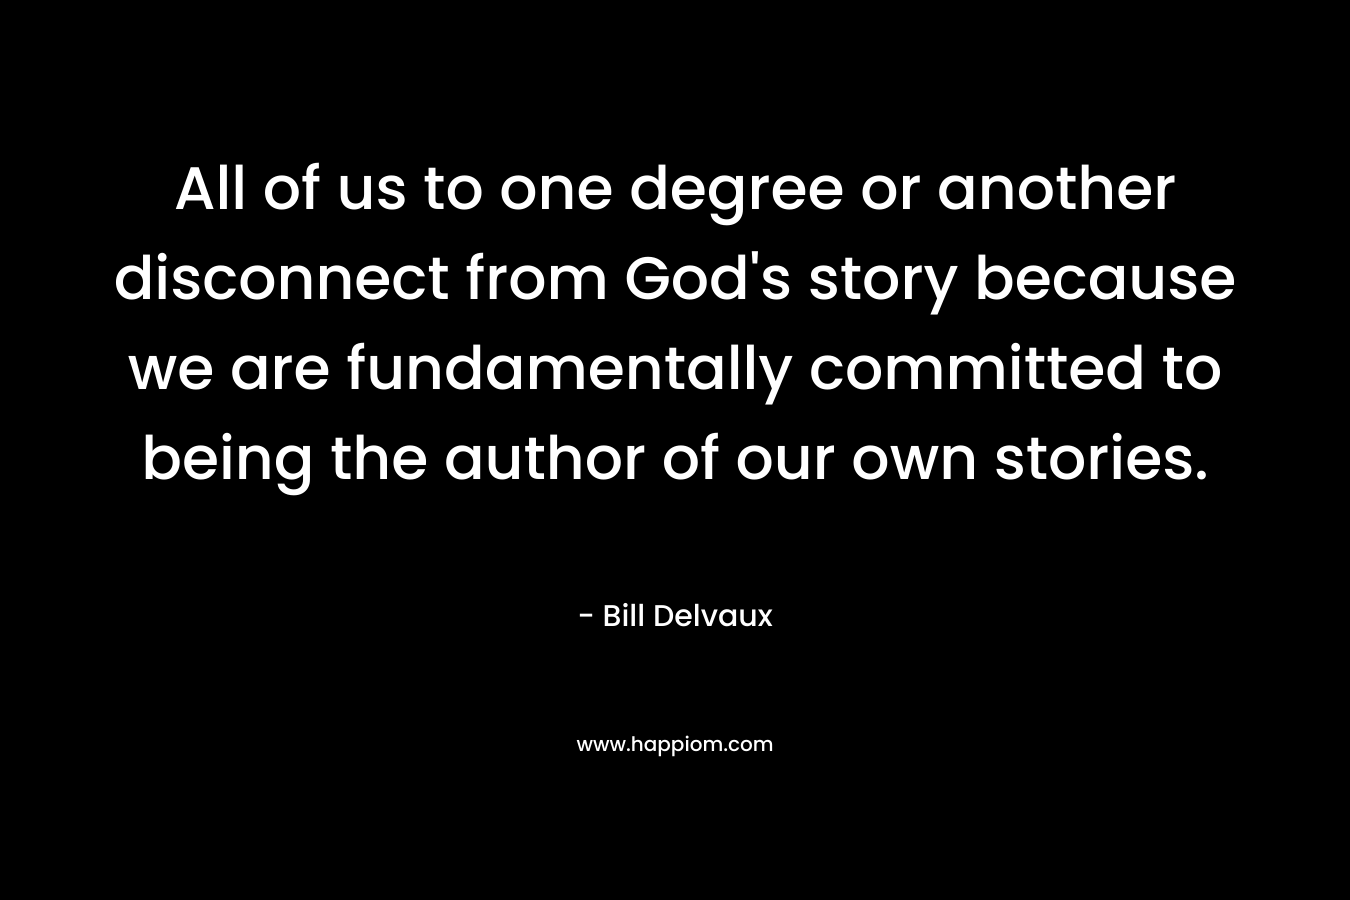 All of us to one degree or another disconnect from God's story because we are fundamentally committed to being the author of our own stories.